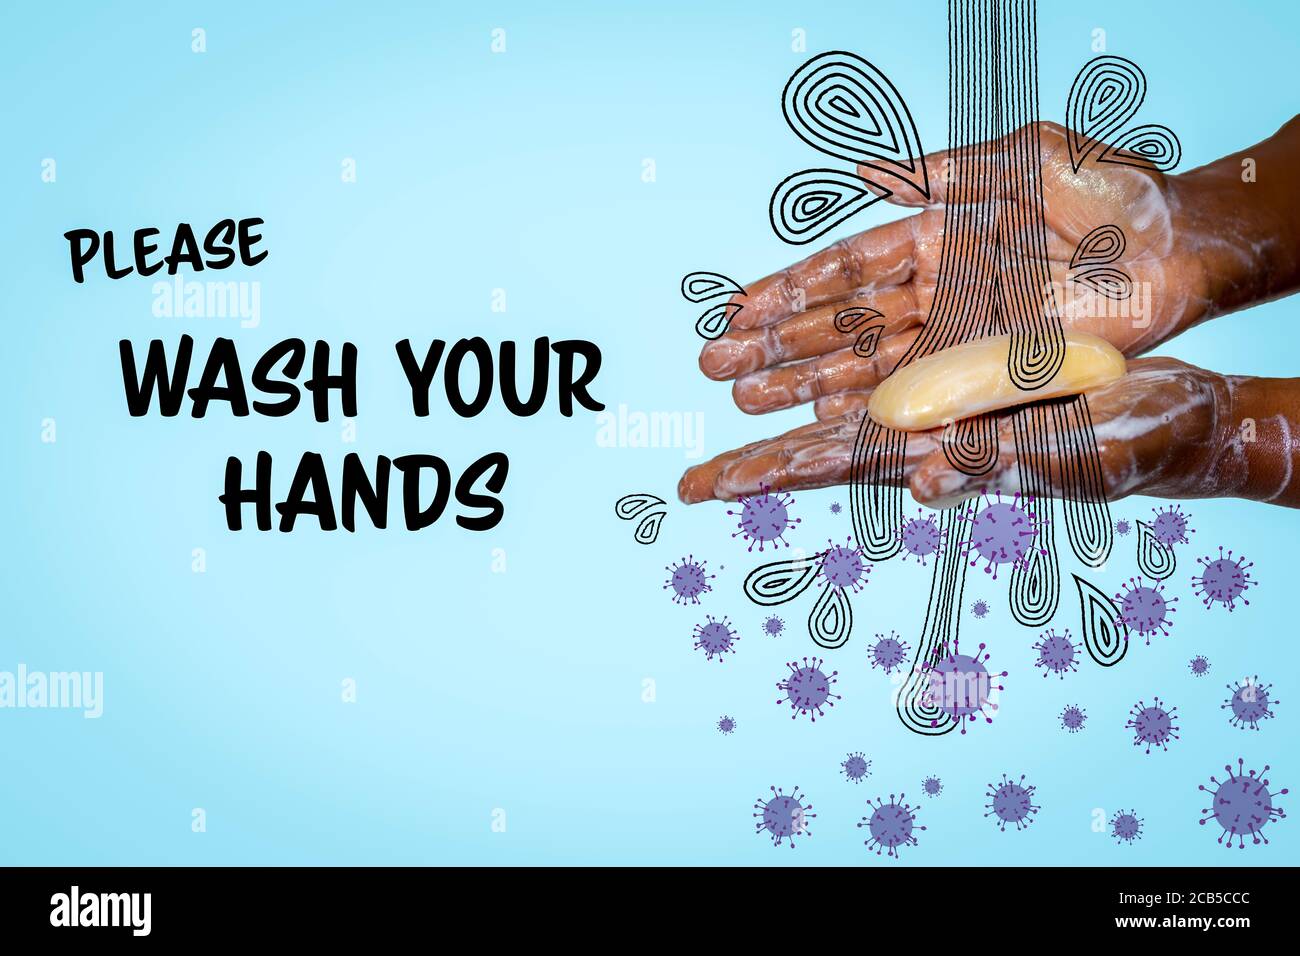 Concept image of African Australian woman washing hands with soap with stylised a hand drawn water and virus illustration, Please wash your hands text Stock Photo